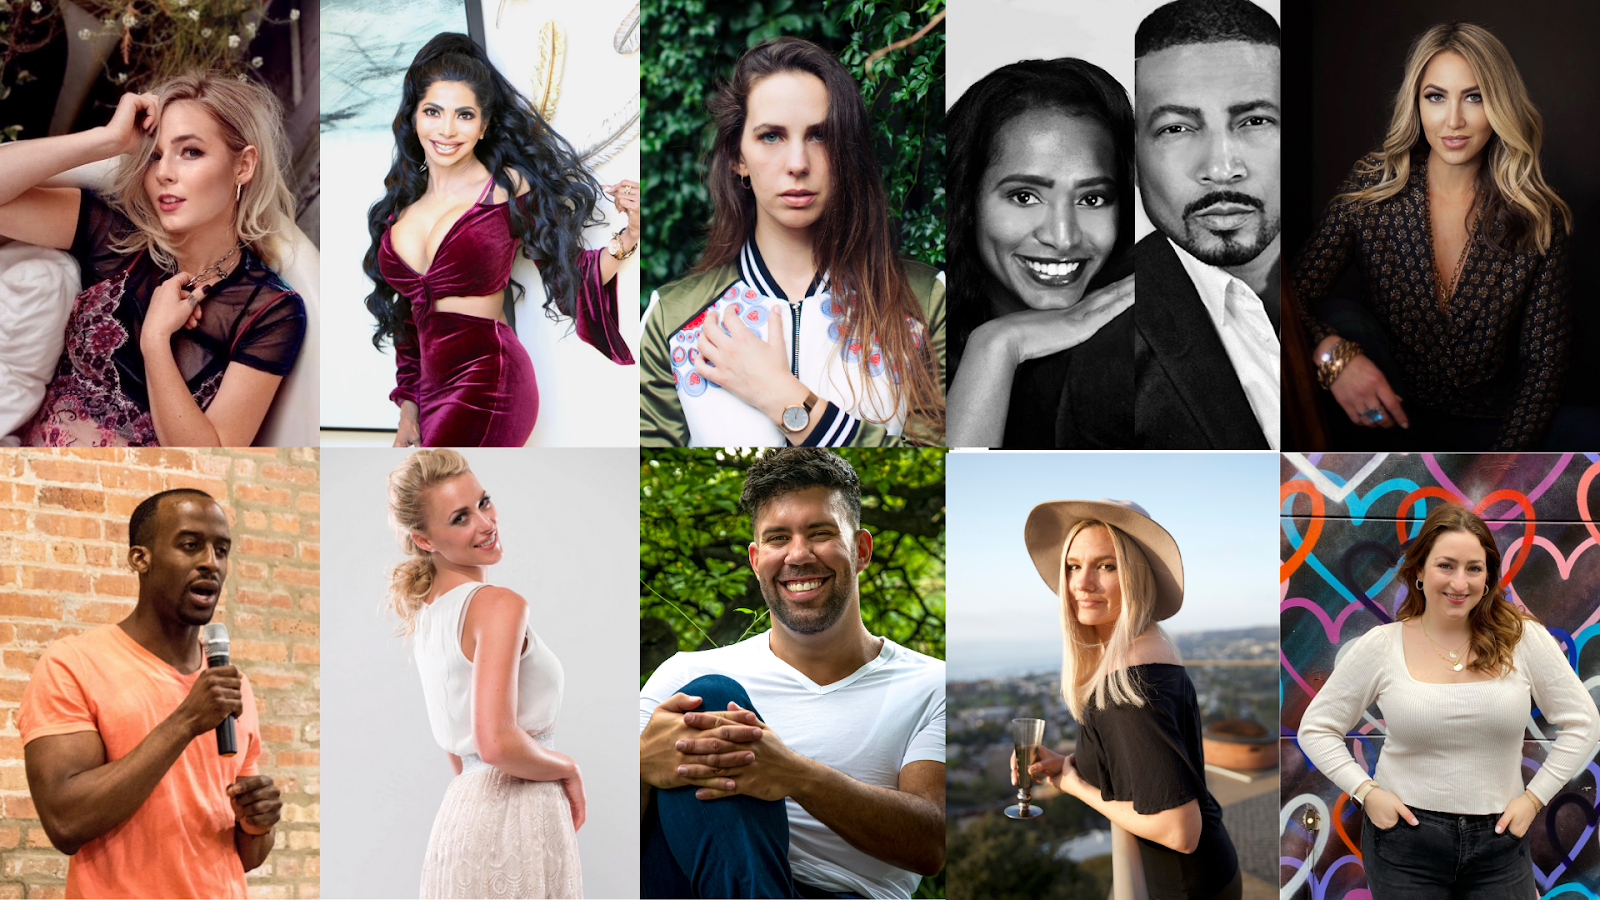 The 10 Dating Experts & Coaches To Watch in 2021